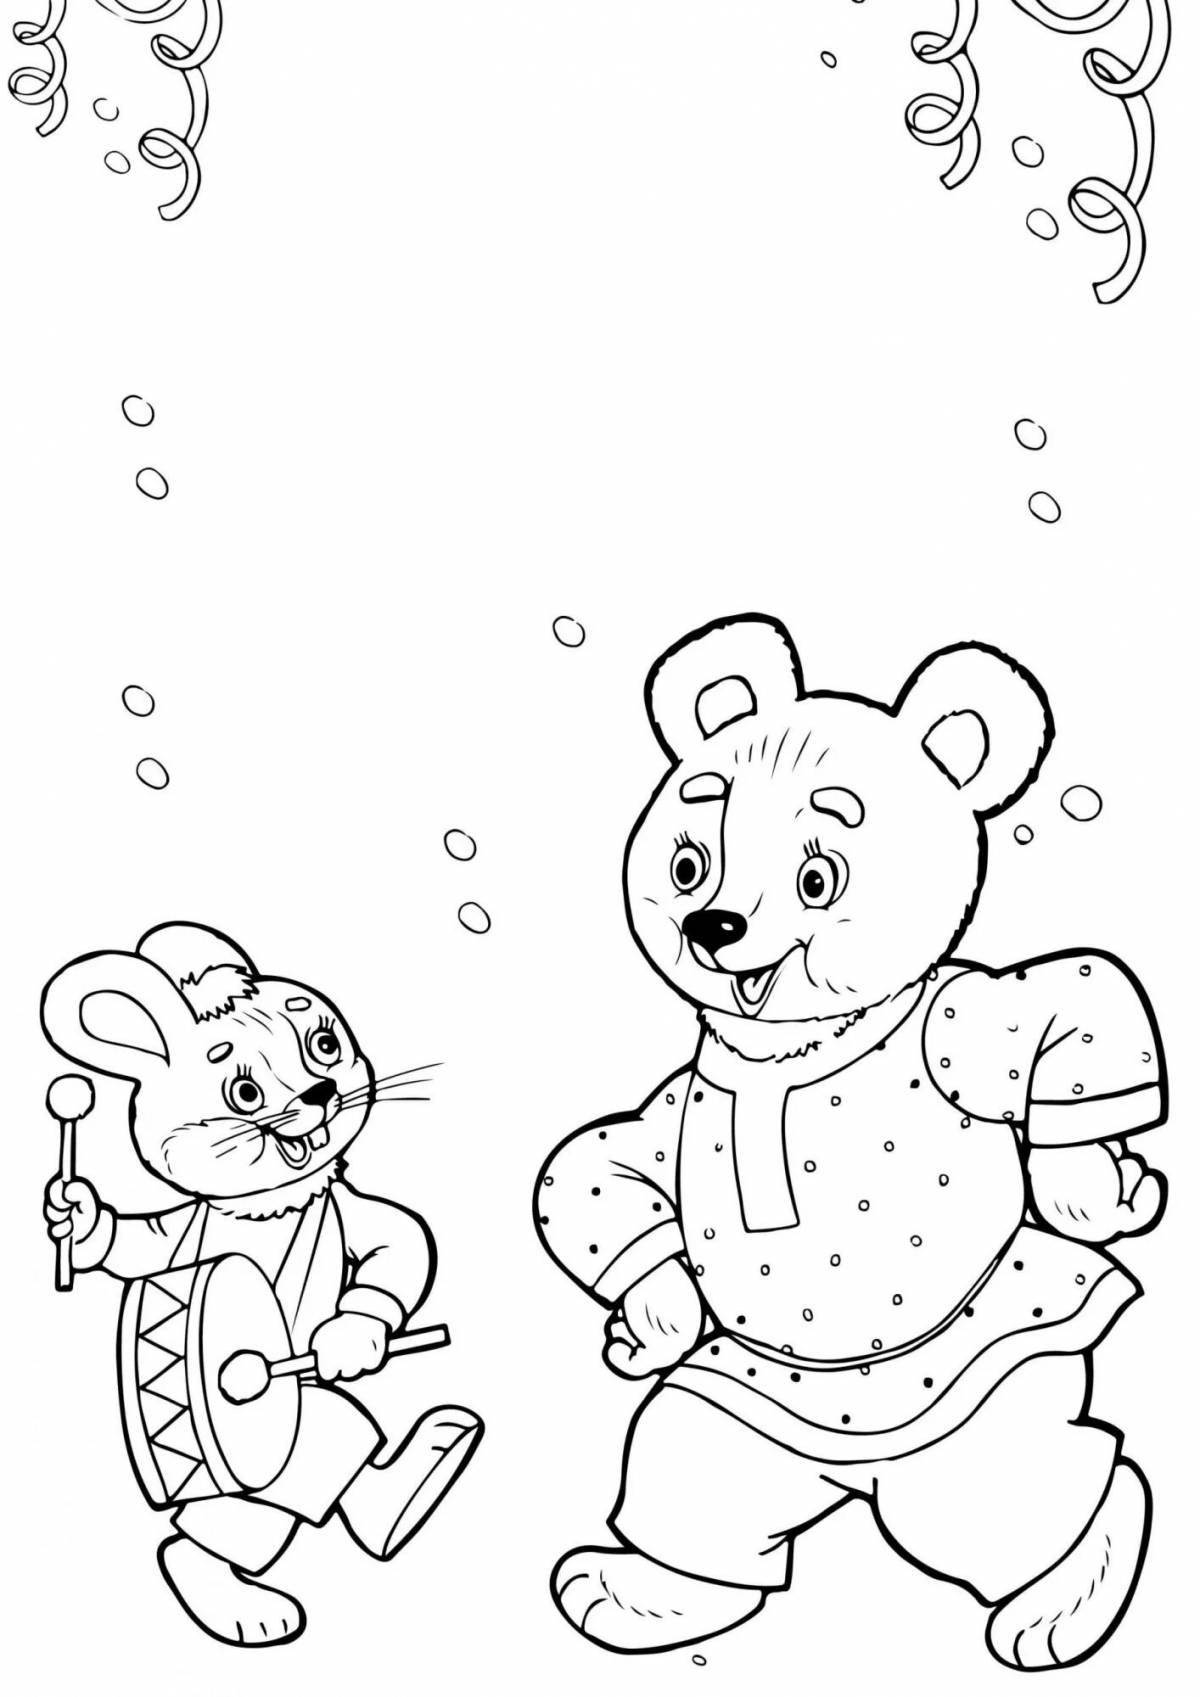 Bear and hare coloring page